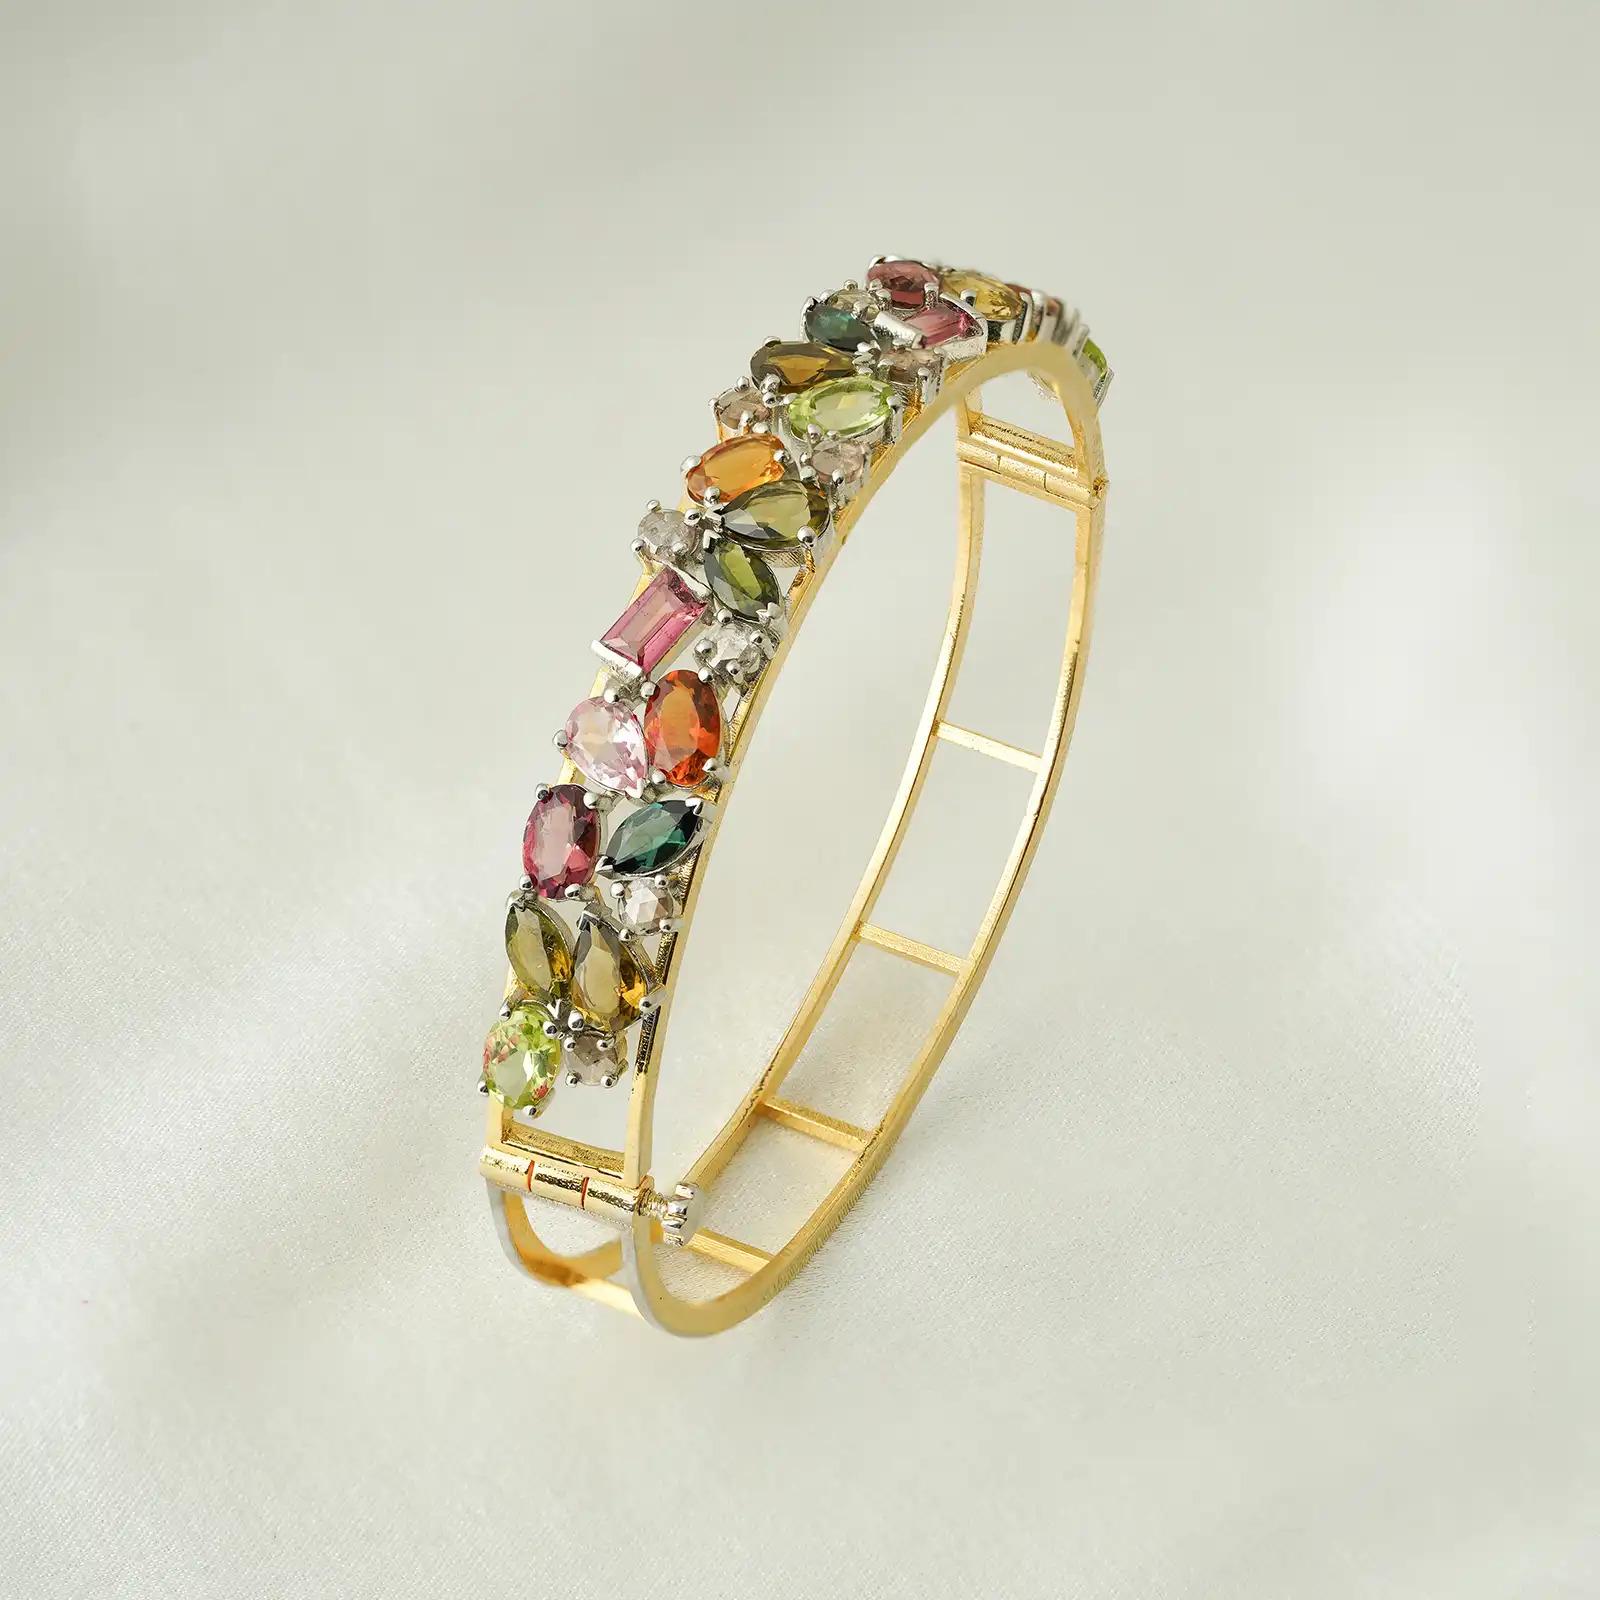 Moi Autumn Gold Diamond and Gemstone Bracelet In New Condition For Sale In Lawrenceville, GA